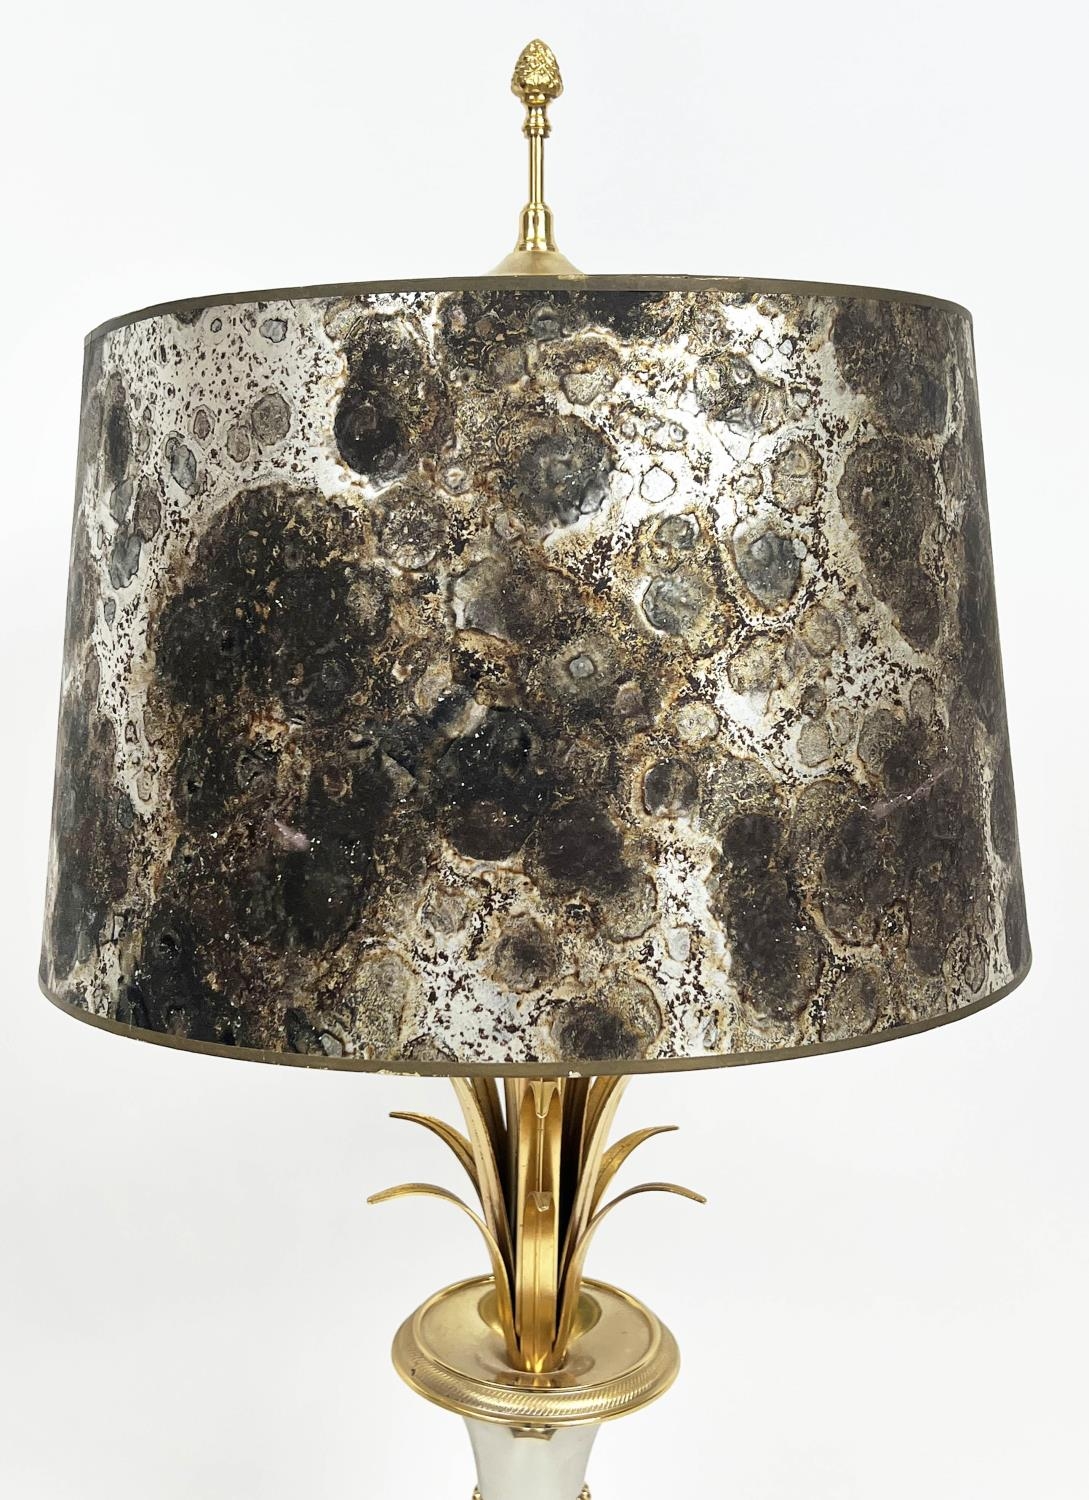 ATTRIBUTED TO MAISON CHARLES TABLE LAMP, French circa 1965, ormolu with original marbled shade, 75cm - Image 2 of 6